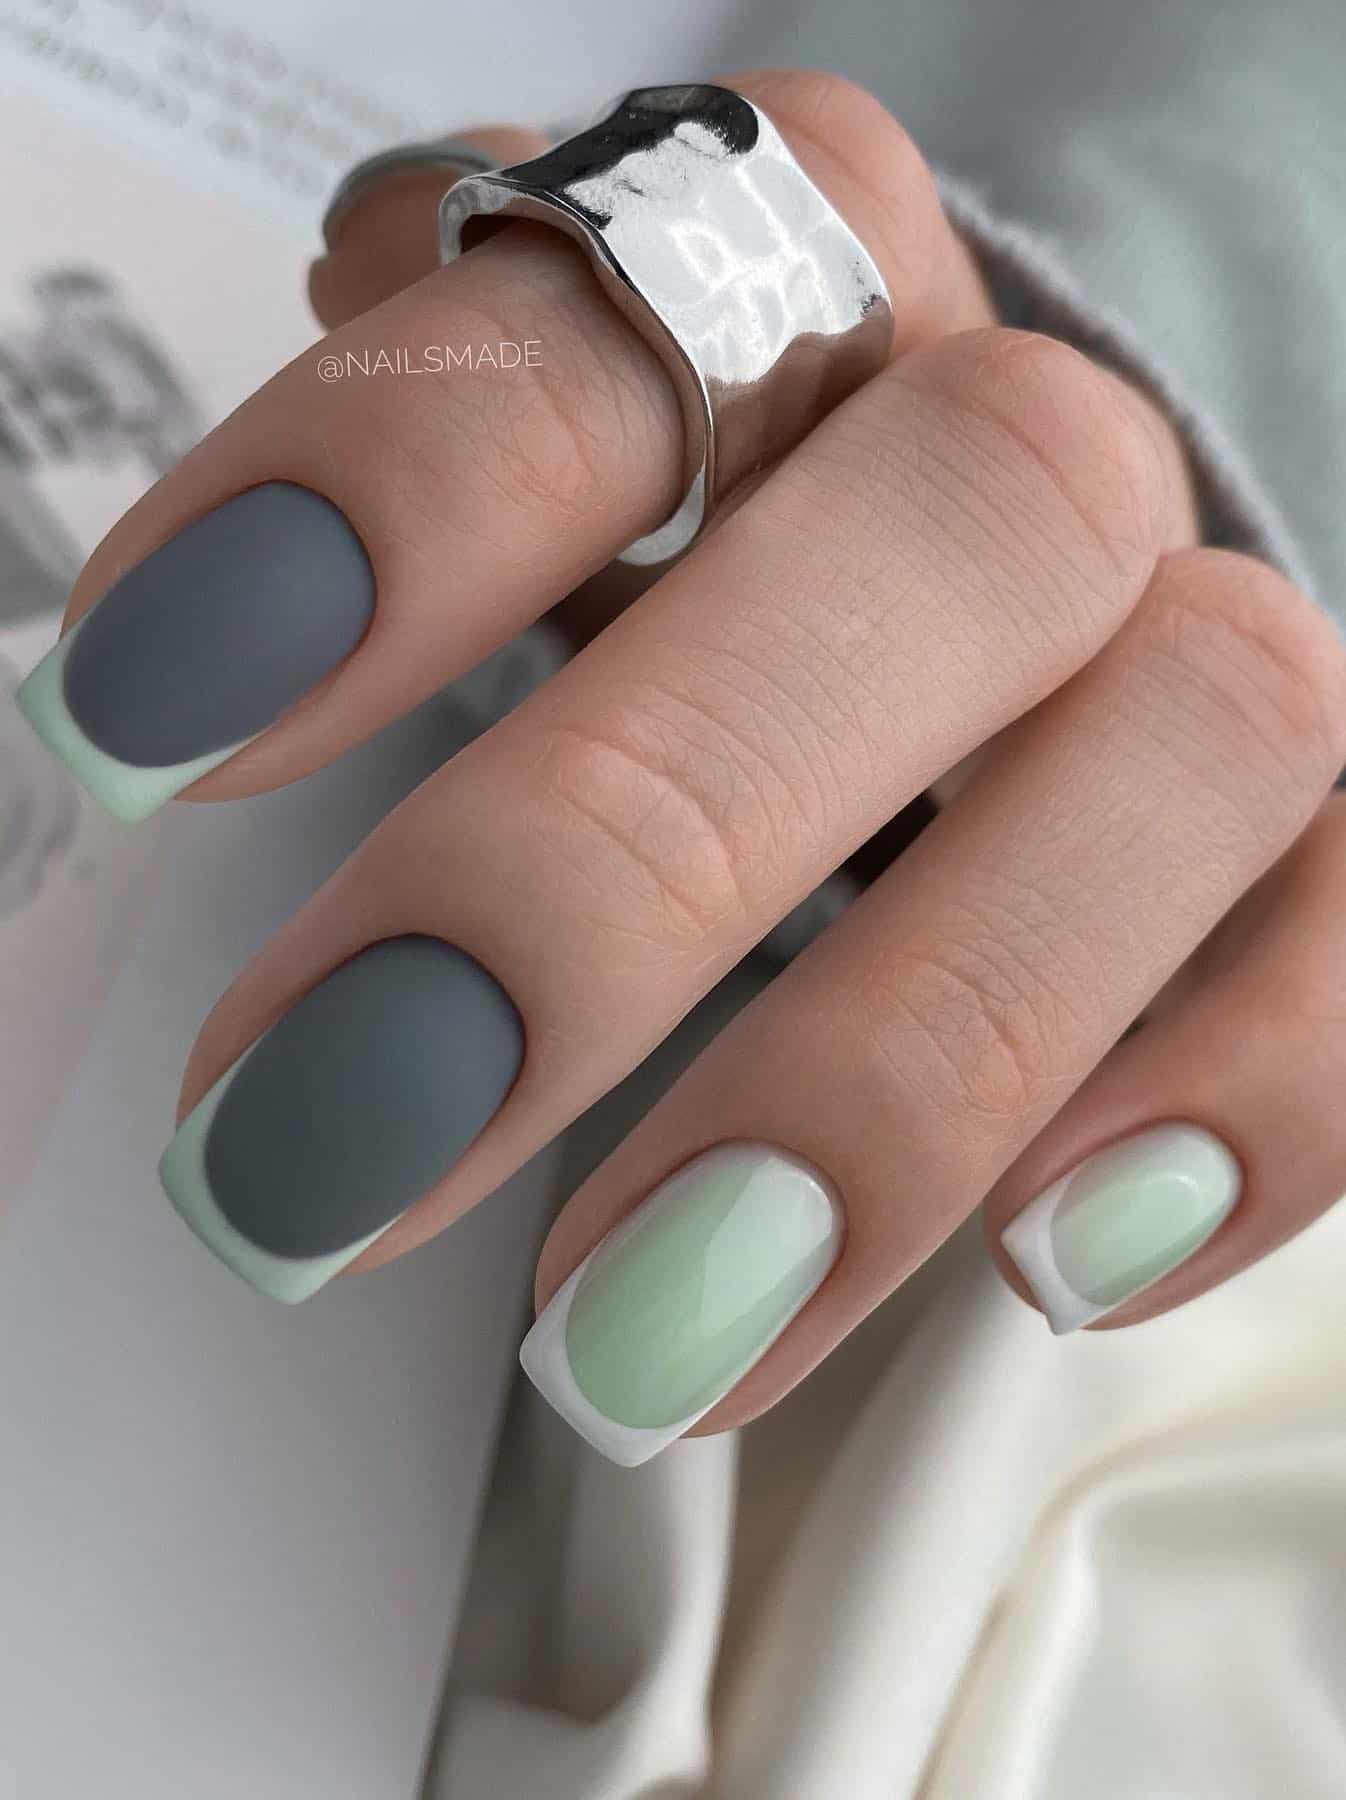 A hand with short square nails, half painted a glossy mint green with white French tips, and the other nails are a dark matte grey with mint green French tips